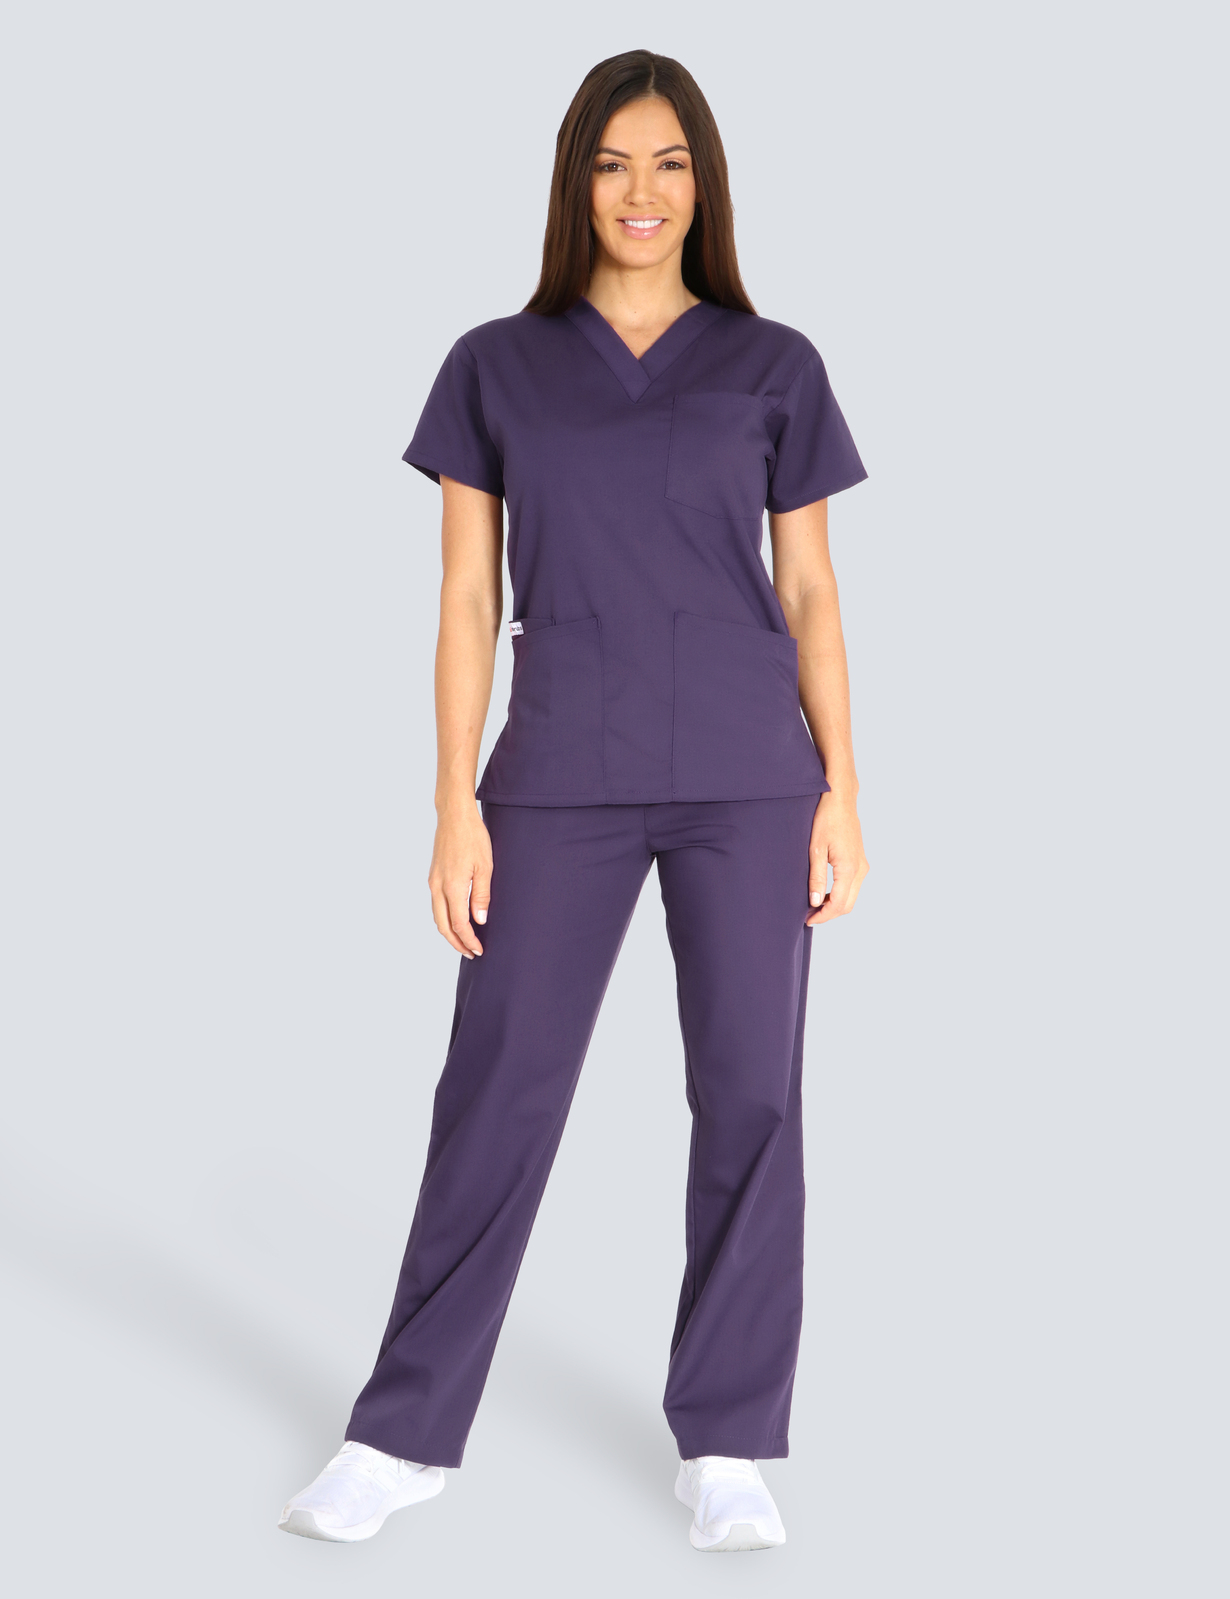 Toowoomba Hospital - Doctor (4 Pocket Scrub Top and Cargo Pants in Aubergine incl Logos)